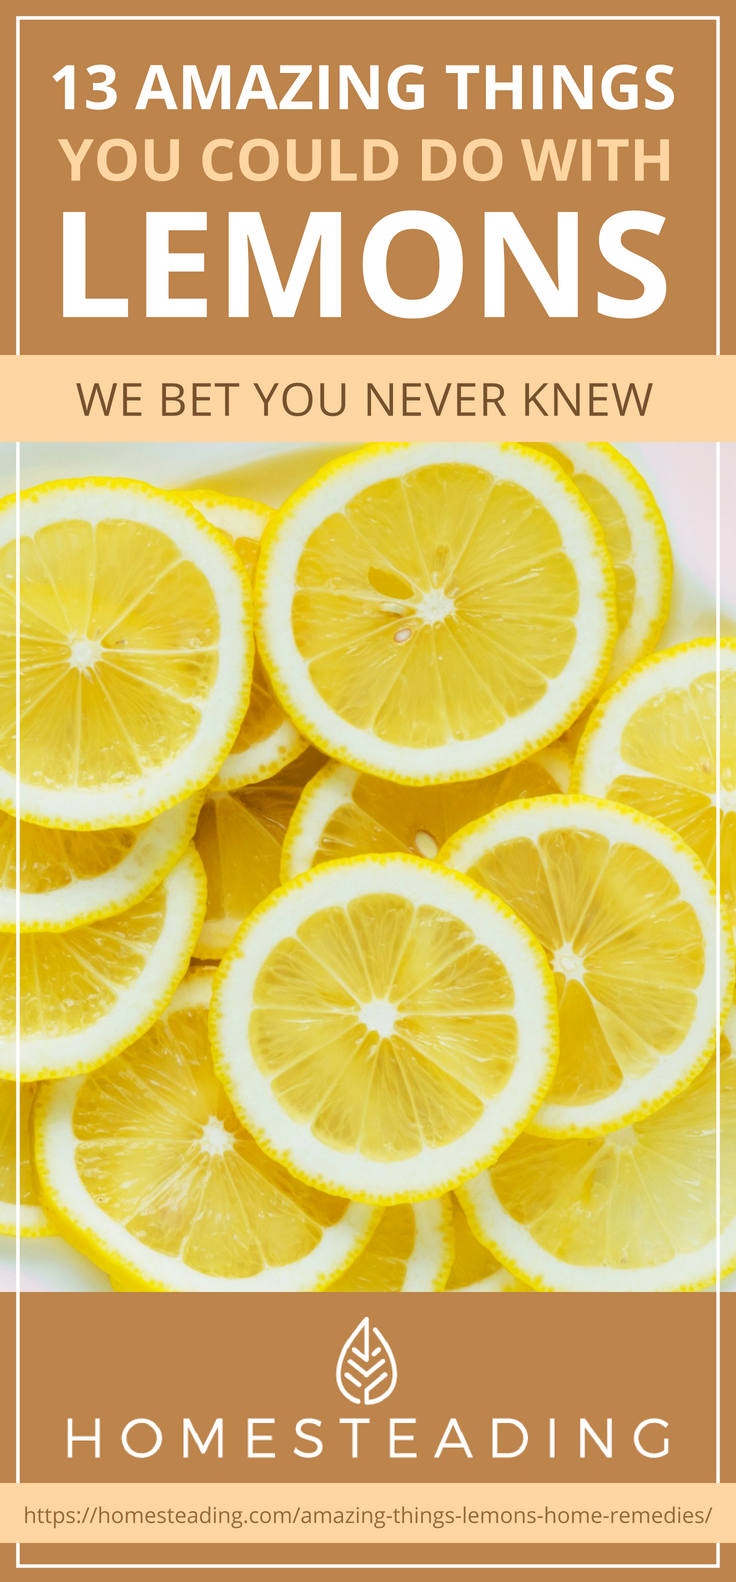 Pinterest Placard | 13 Amazing Things You Could Do With Lemons We Bet You Never Knew